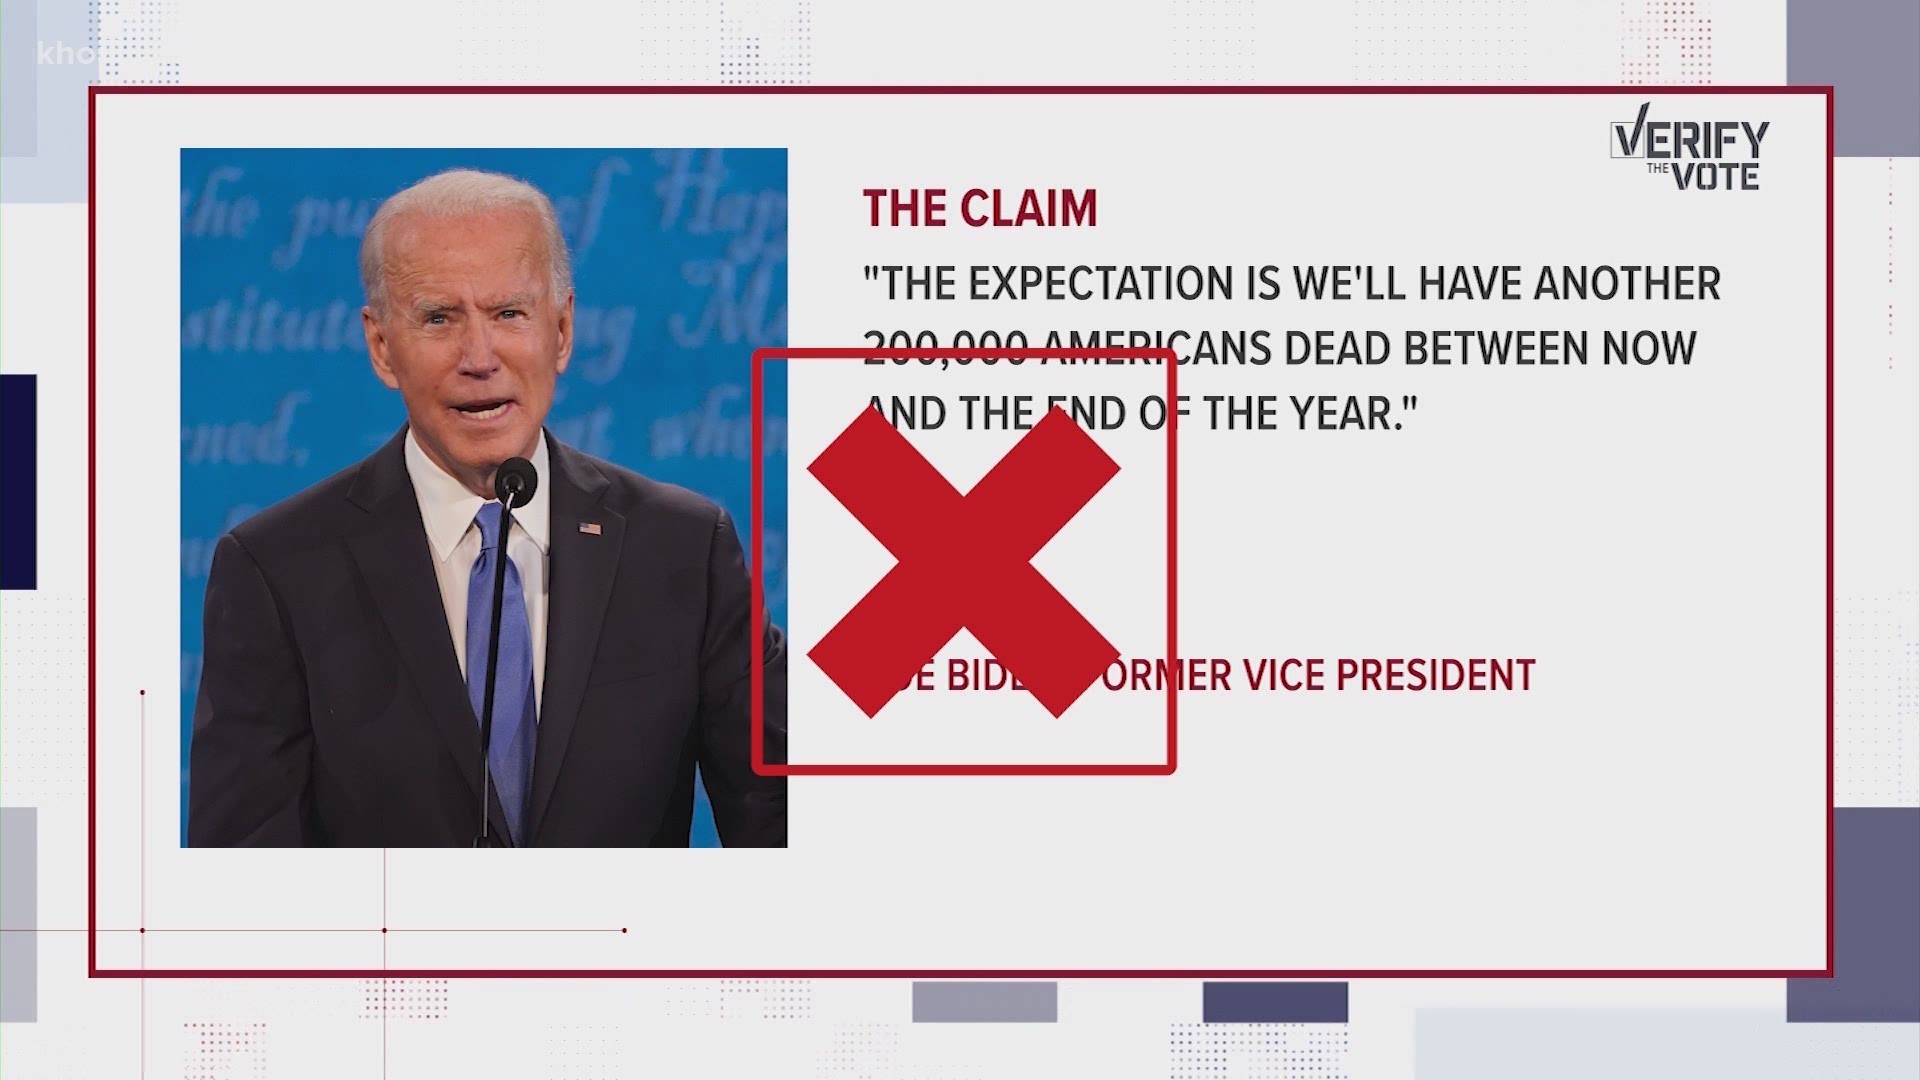 Our KHOU 11 VERIFY team looked into claims made by President Trump and former vice president Biden during the final presidential debate of 2020.